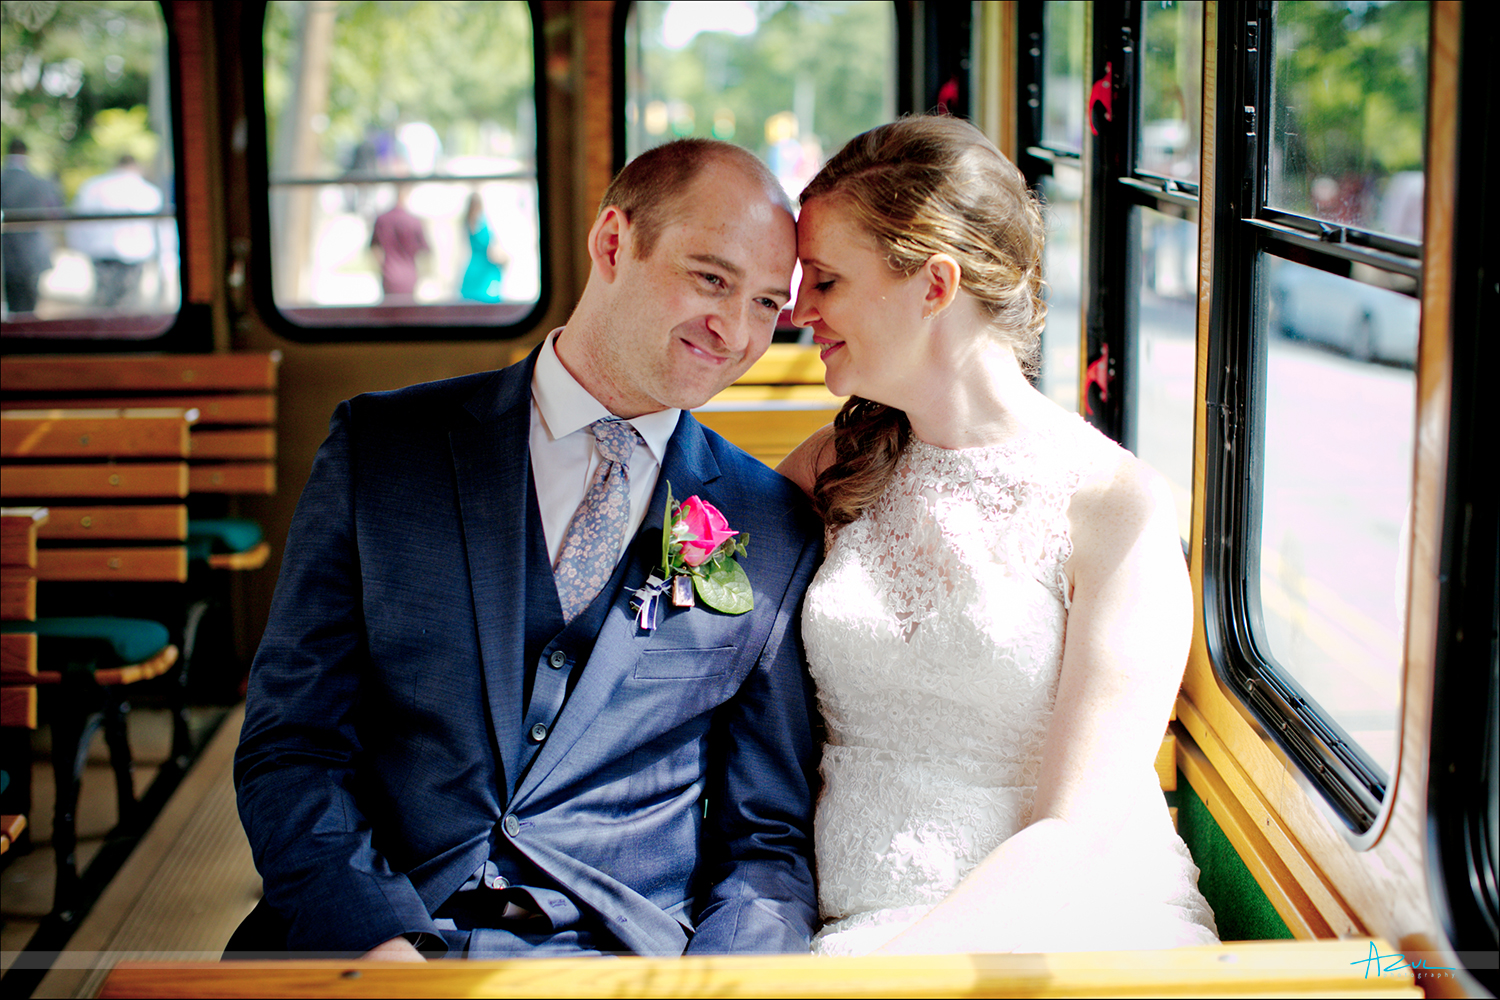 Raleigh wedding trolly is the best and is available for rental for any wedding or occasion. 